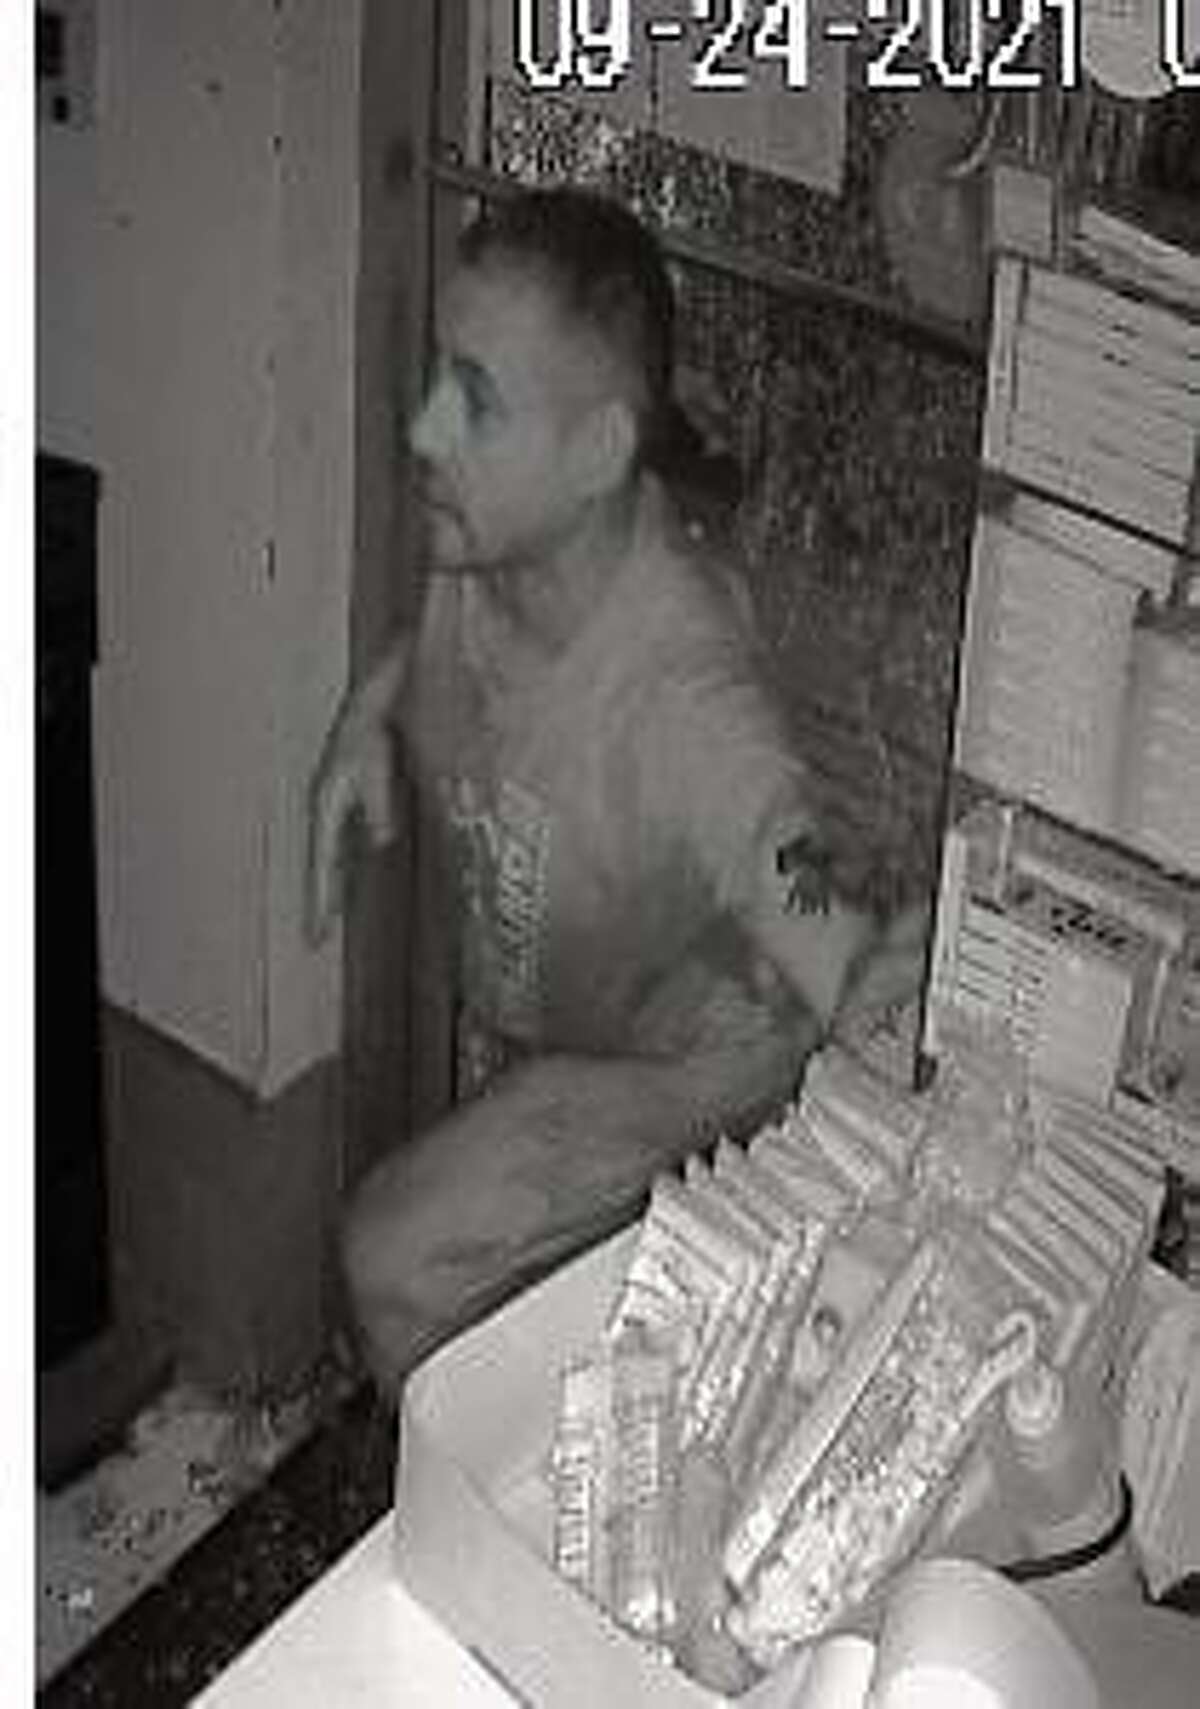 Police said this man broke into the East Main Market early on the morning of Sept. 24.